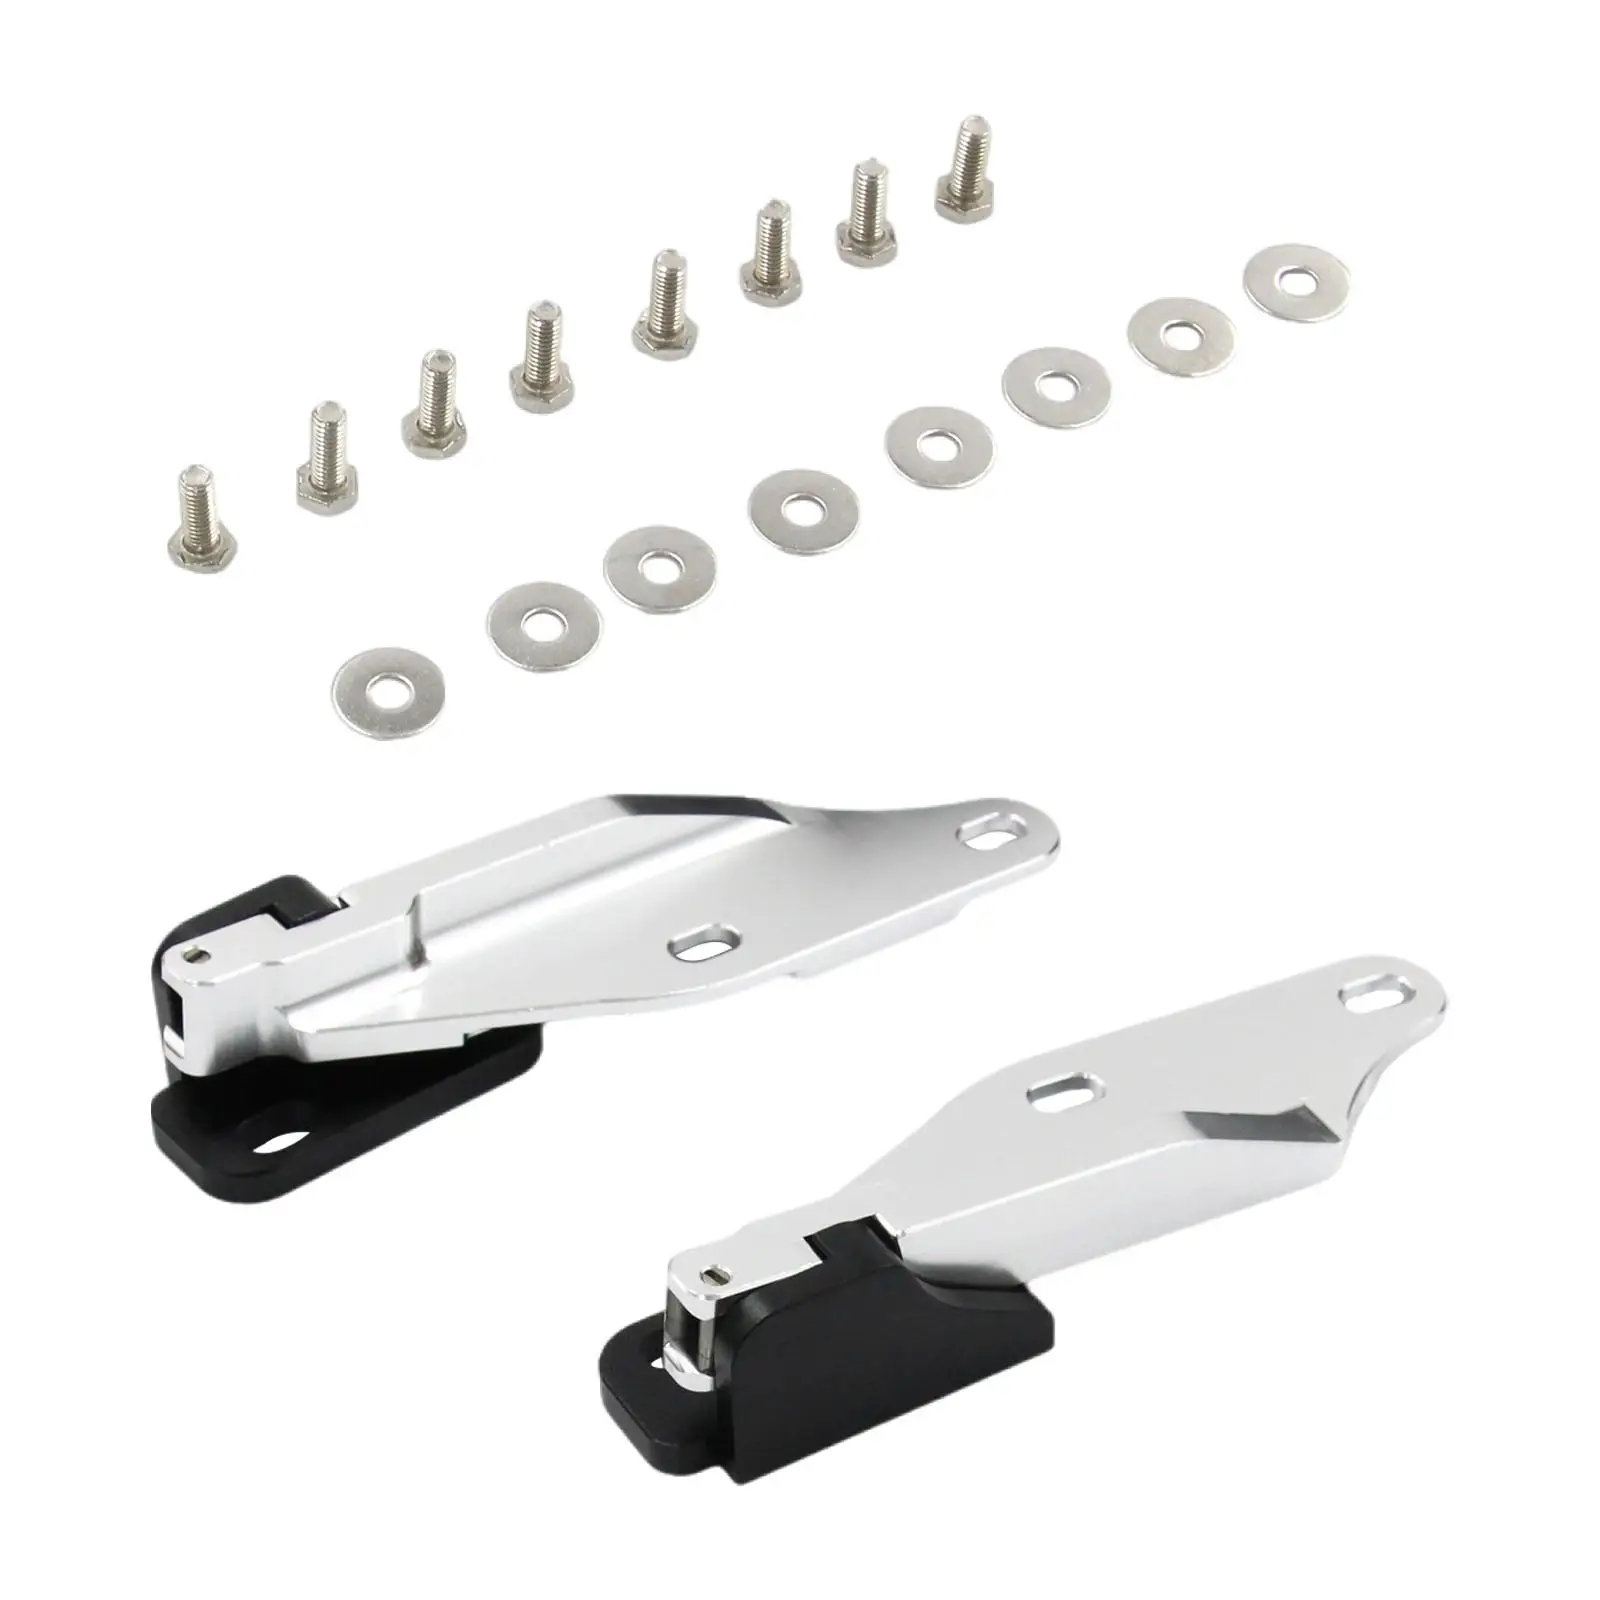 2 Pieces Quick Release Hood Hinge Professional Sturdy Automotive Hood Hinge for